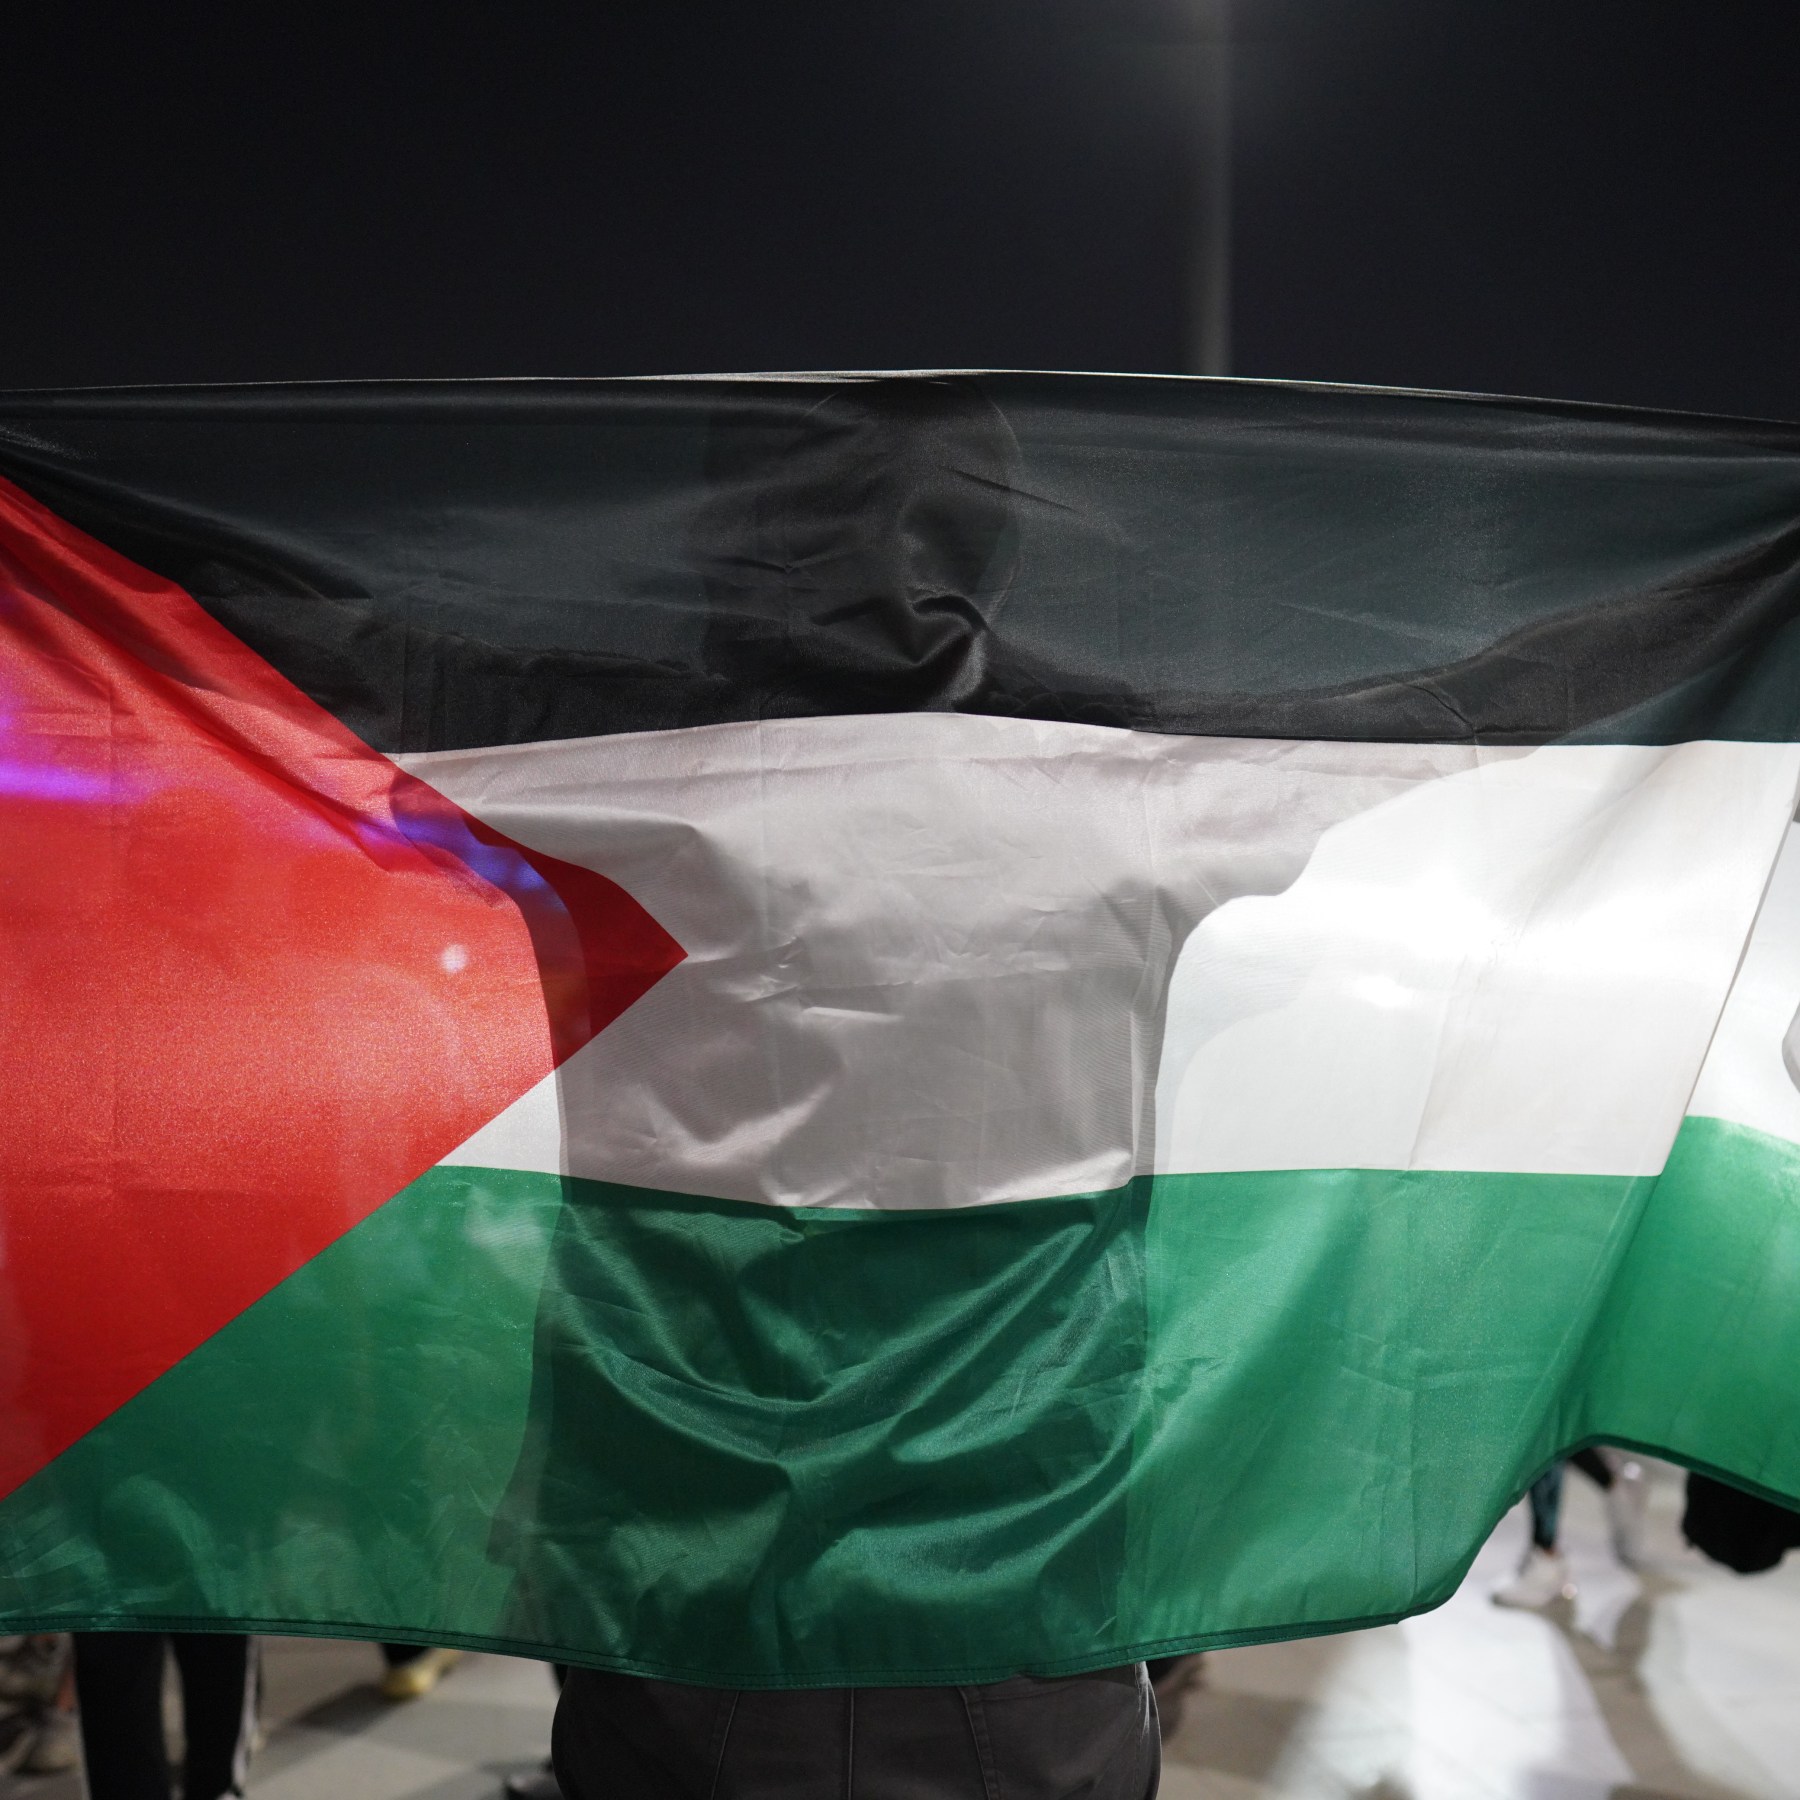 Photos: Palestinian flags fly high at the World Cup in Qatar